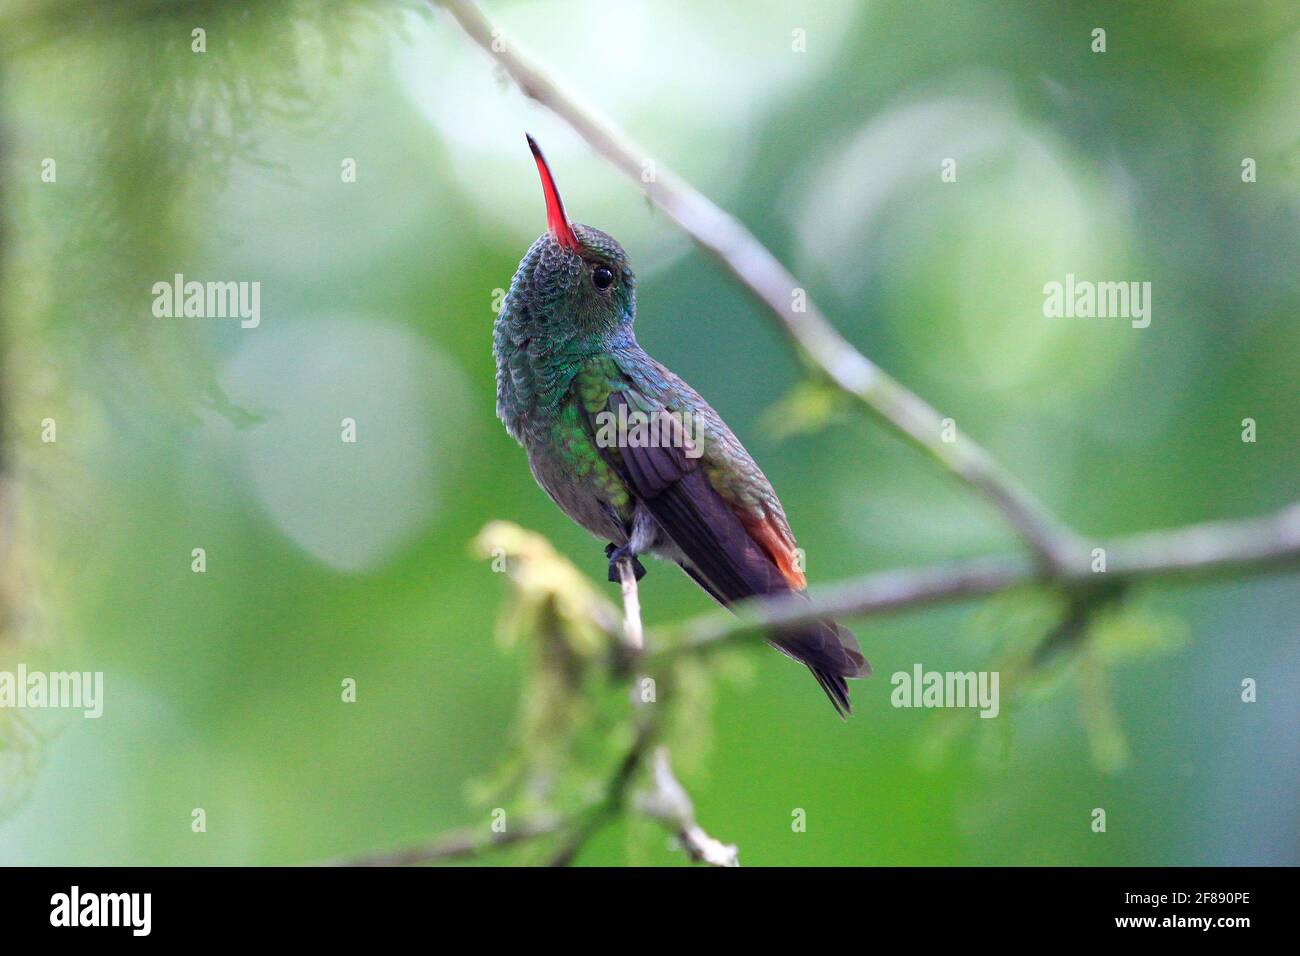 Rufous tailed hummingbird perched on a branch with green background in Costa Rica Stock Photo